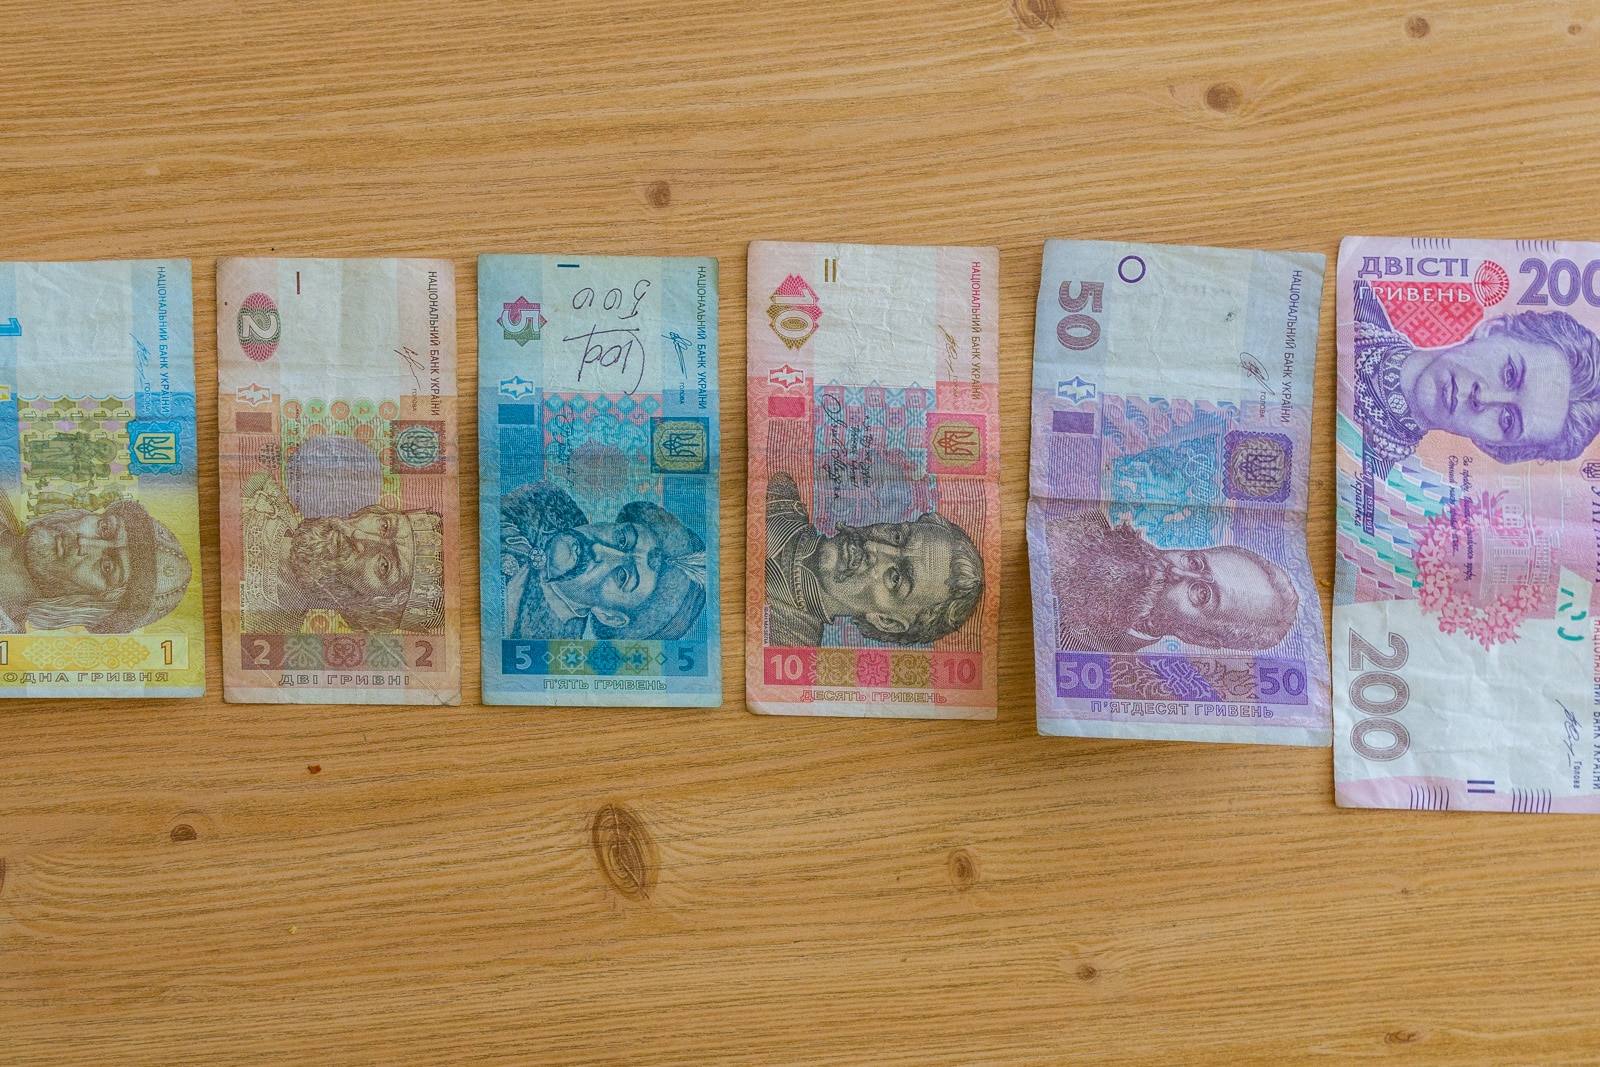 Ukrainian currency lined in a row